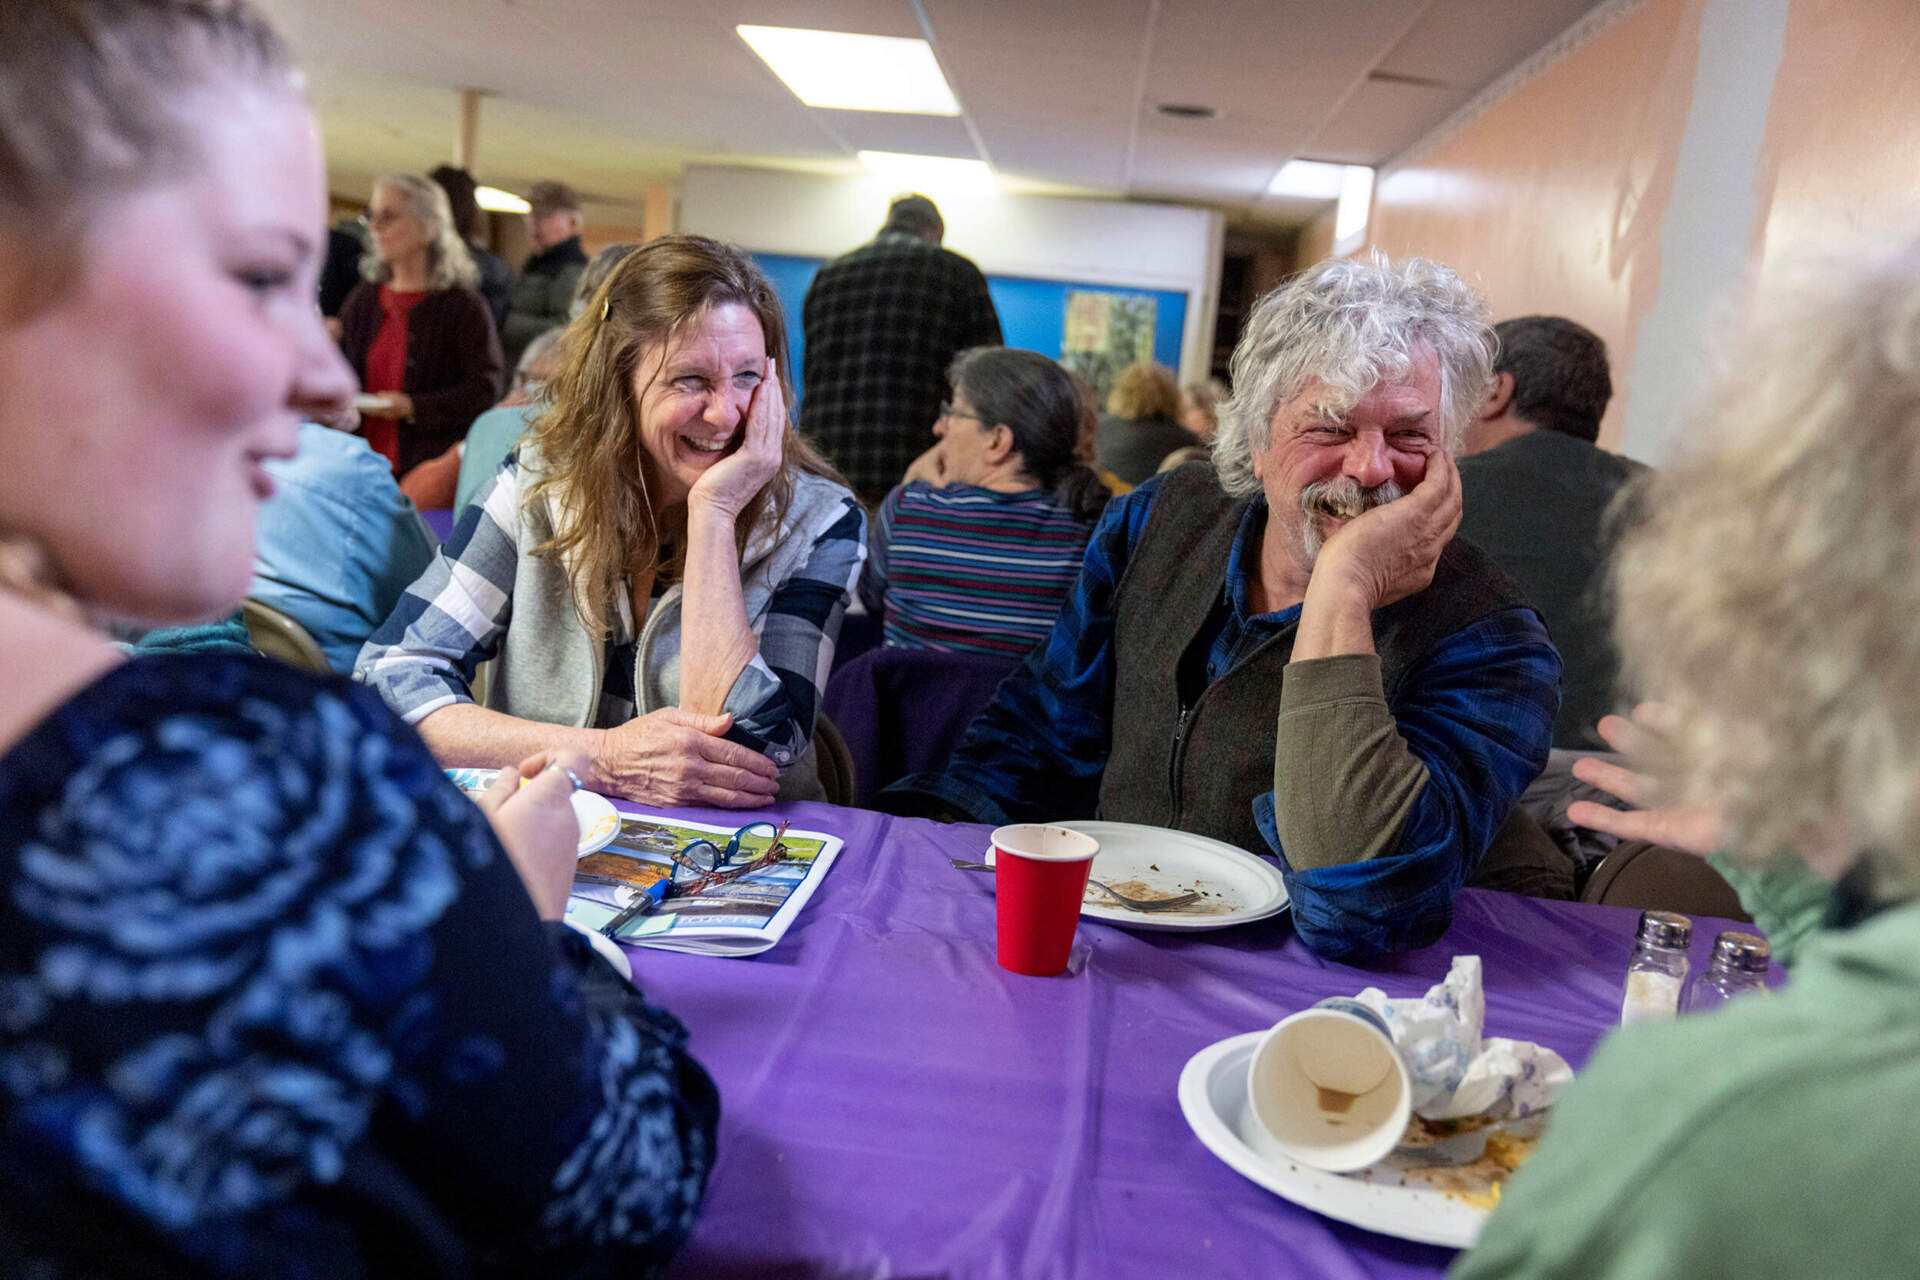 Nancy Davis, left, and Shorty Towne, right, talk with fellow residents during a pot luck luncheon following the annual Town Meeting, Tuesday, March 5, 2024, in Elmore, Vt. After nearly four hours, Town Meeting adjoins and residents of all political background sit down for lunch at the United Methodist church across the street. (David Goldman/AP)